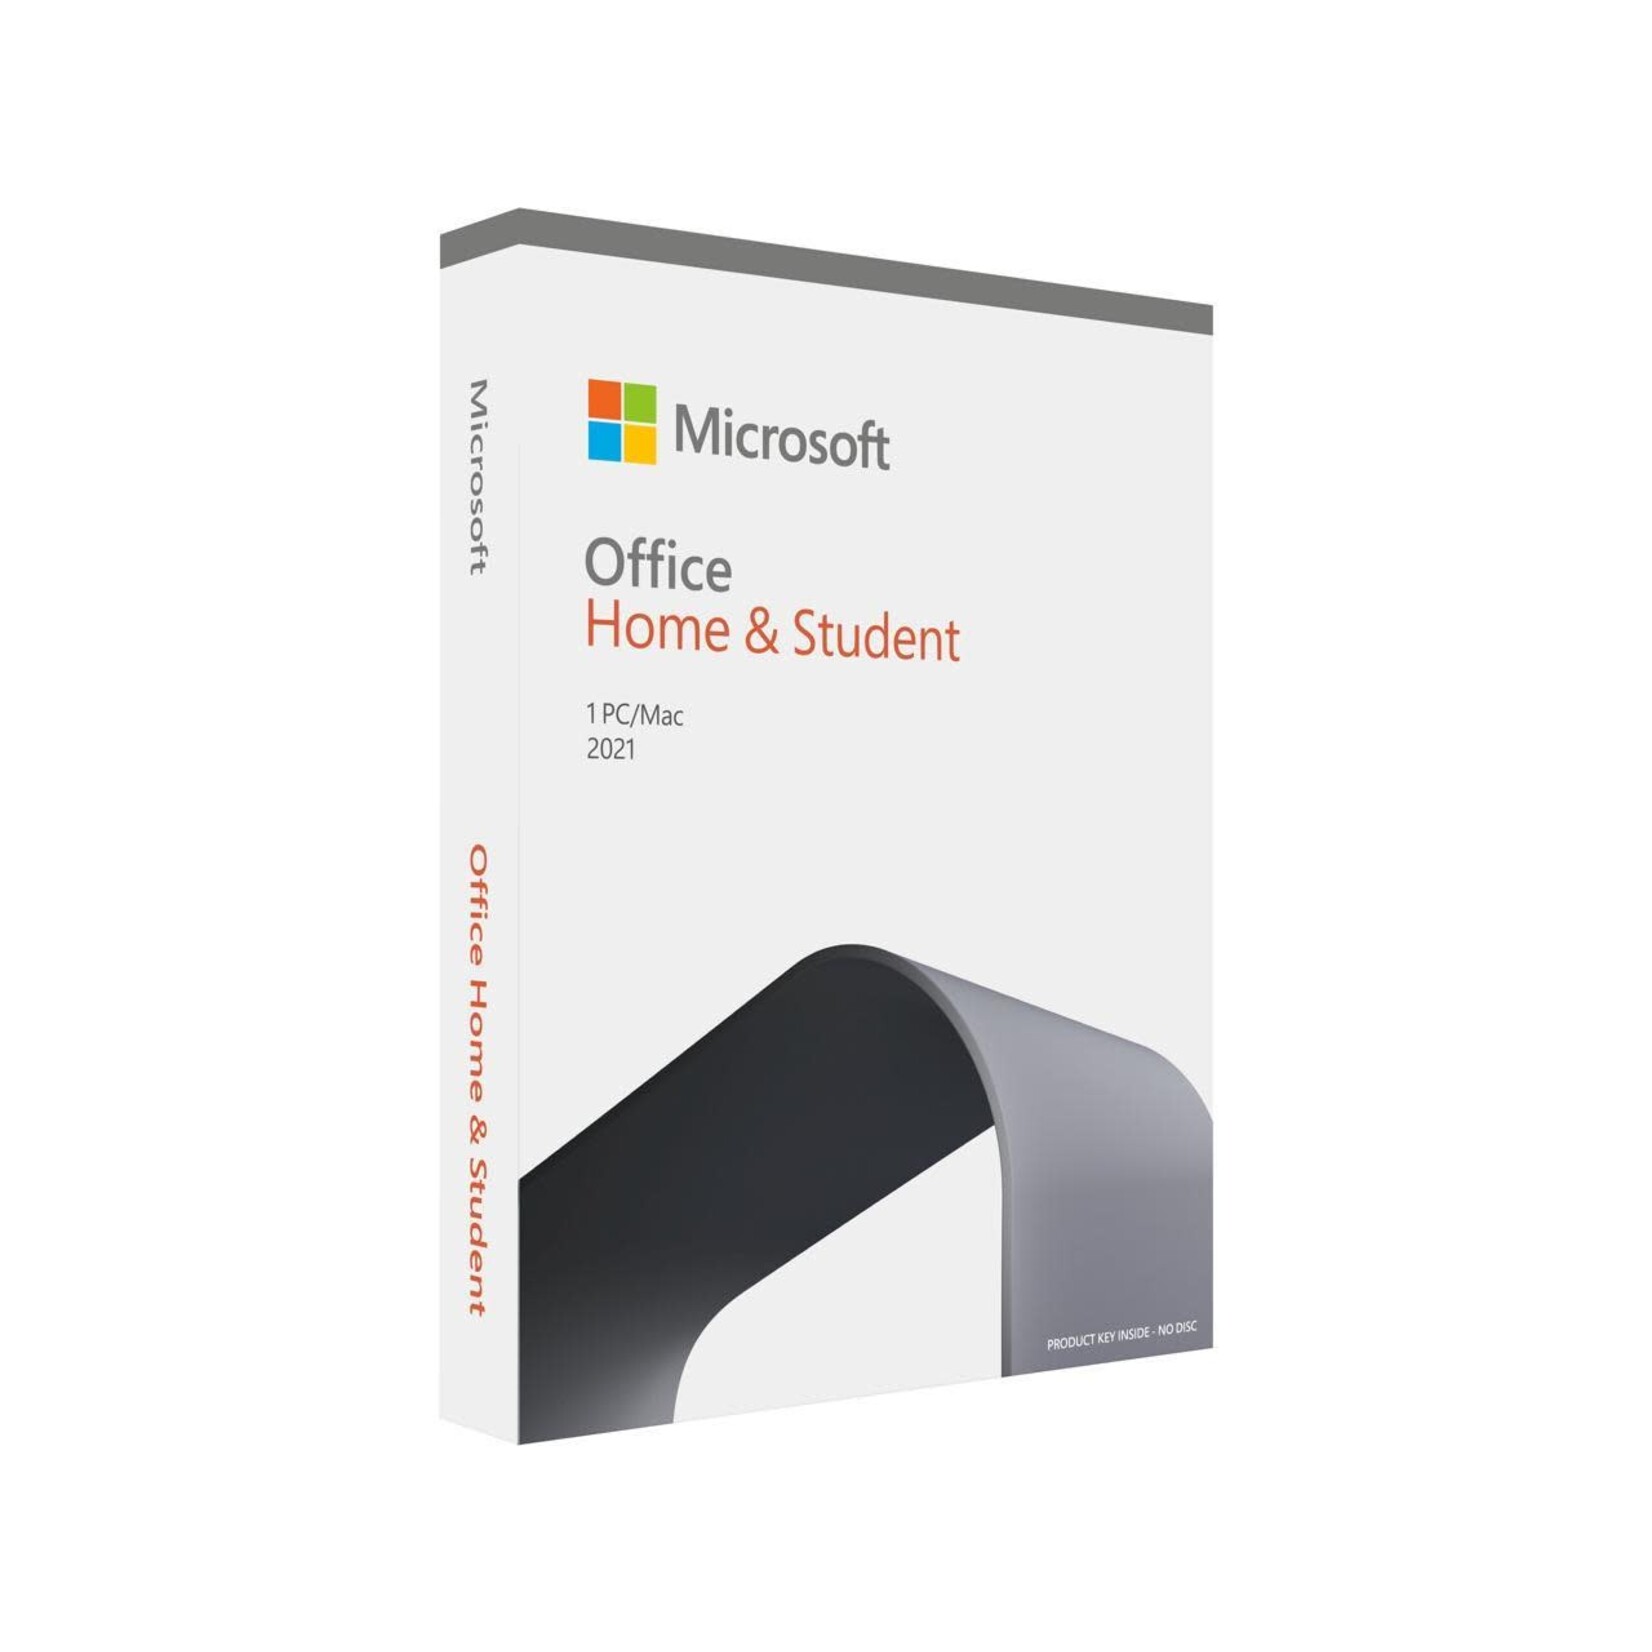 Microsoft MS Office 2021 Home & Student OEM